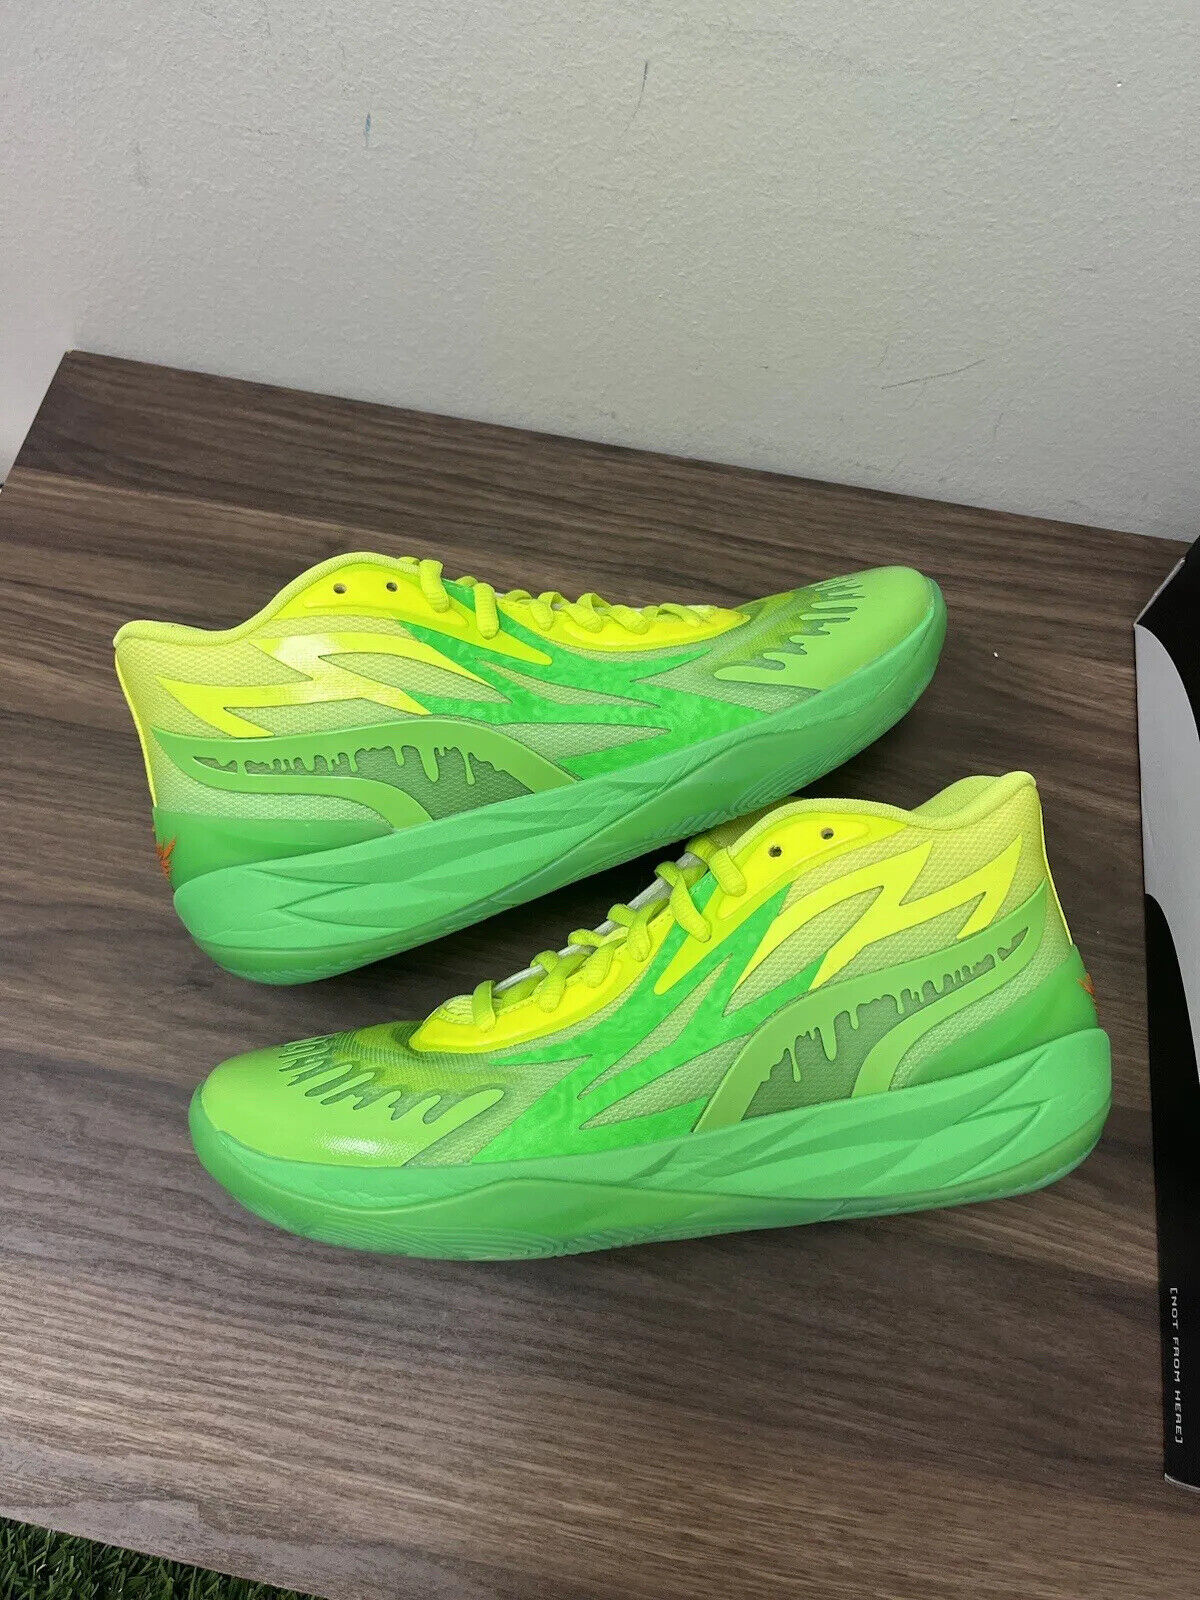 Size 11- Puma MB.02 LaMelo Ball Nickelodeon Slime